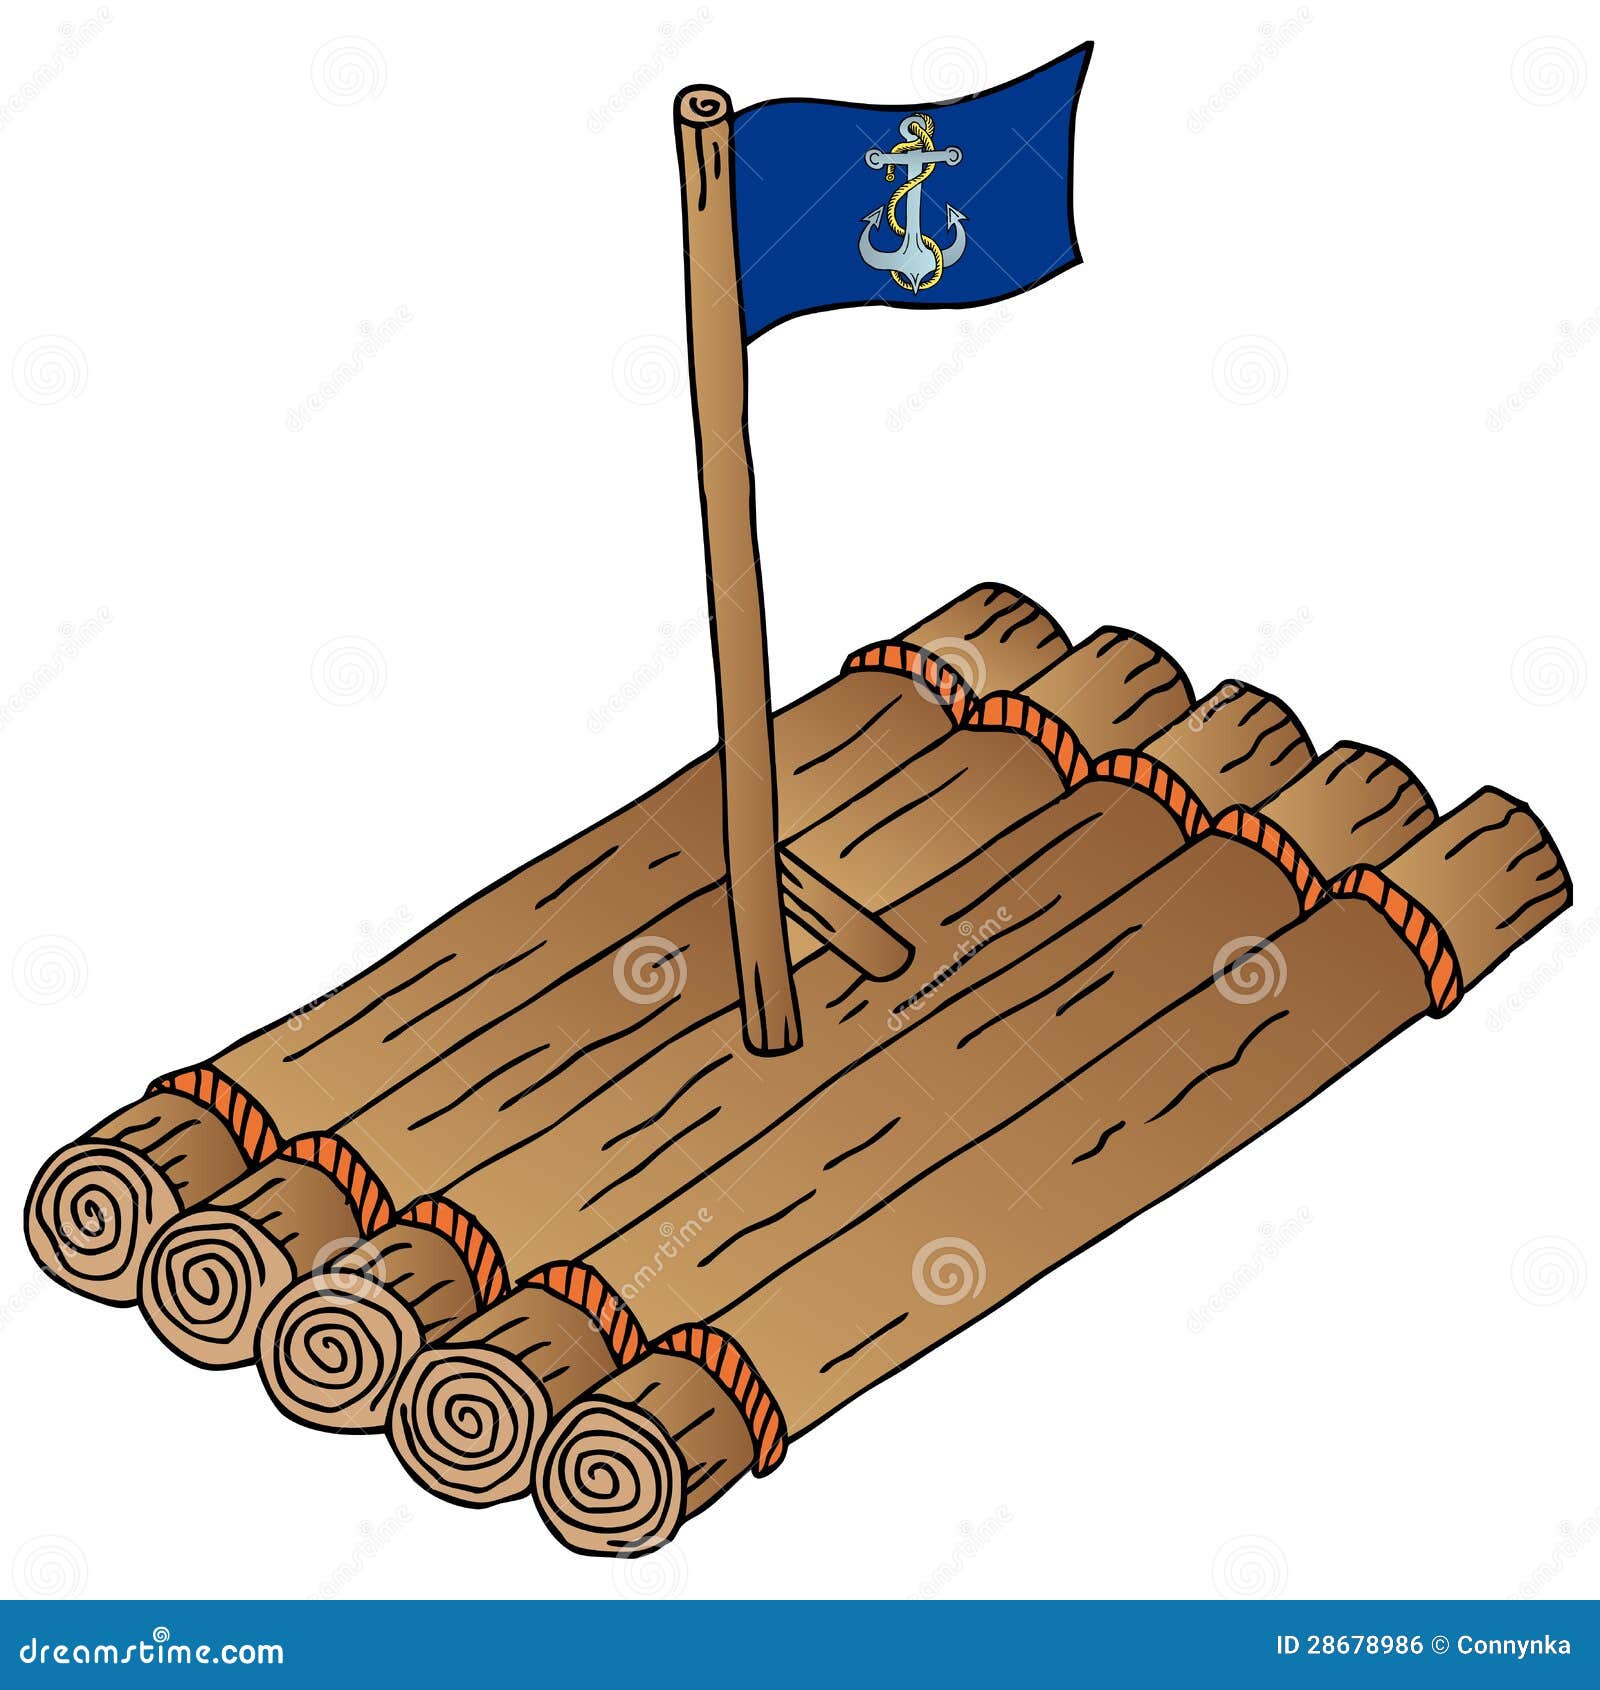 Wooden Raft With Flag Royalty Free Stock Image - Image 